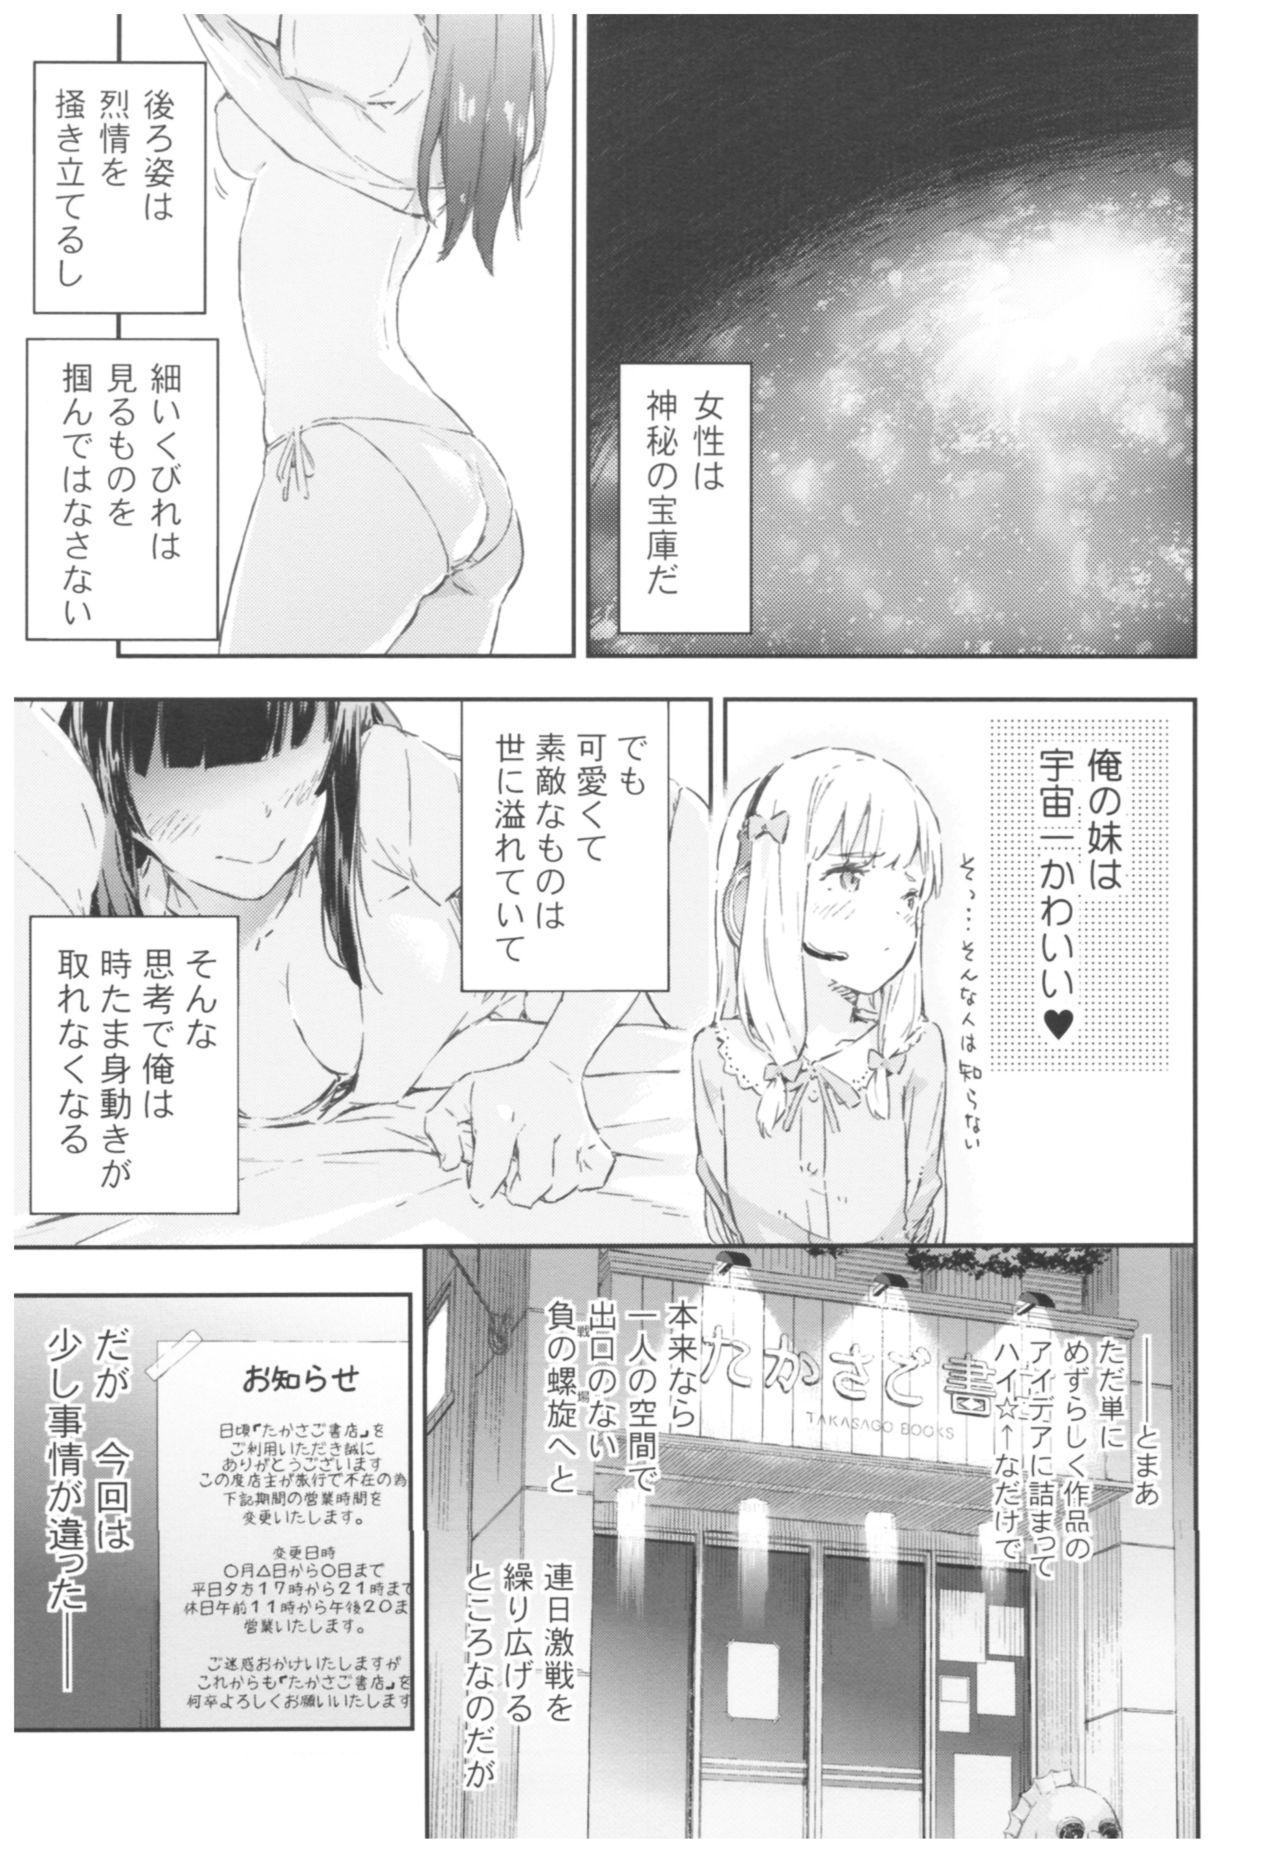 Nude Bookstore clerk - Eromanga sensei Old And Young - Page 2